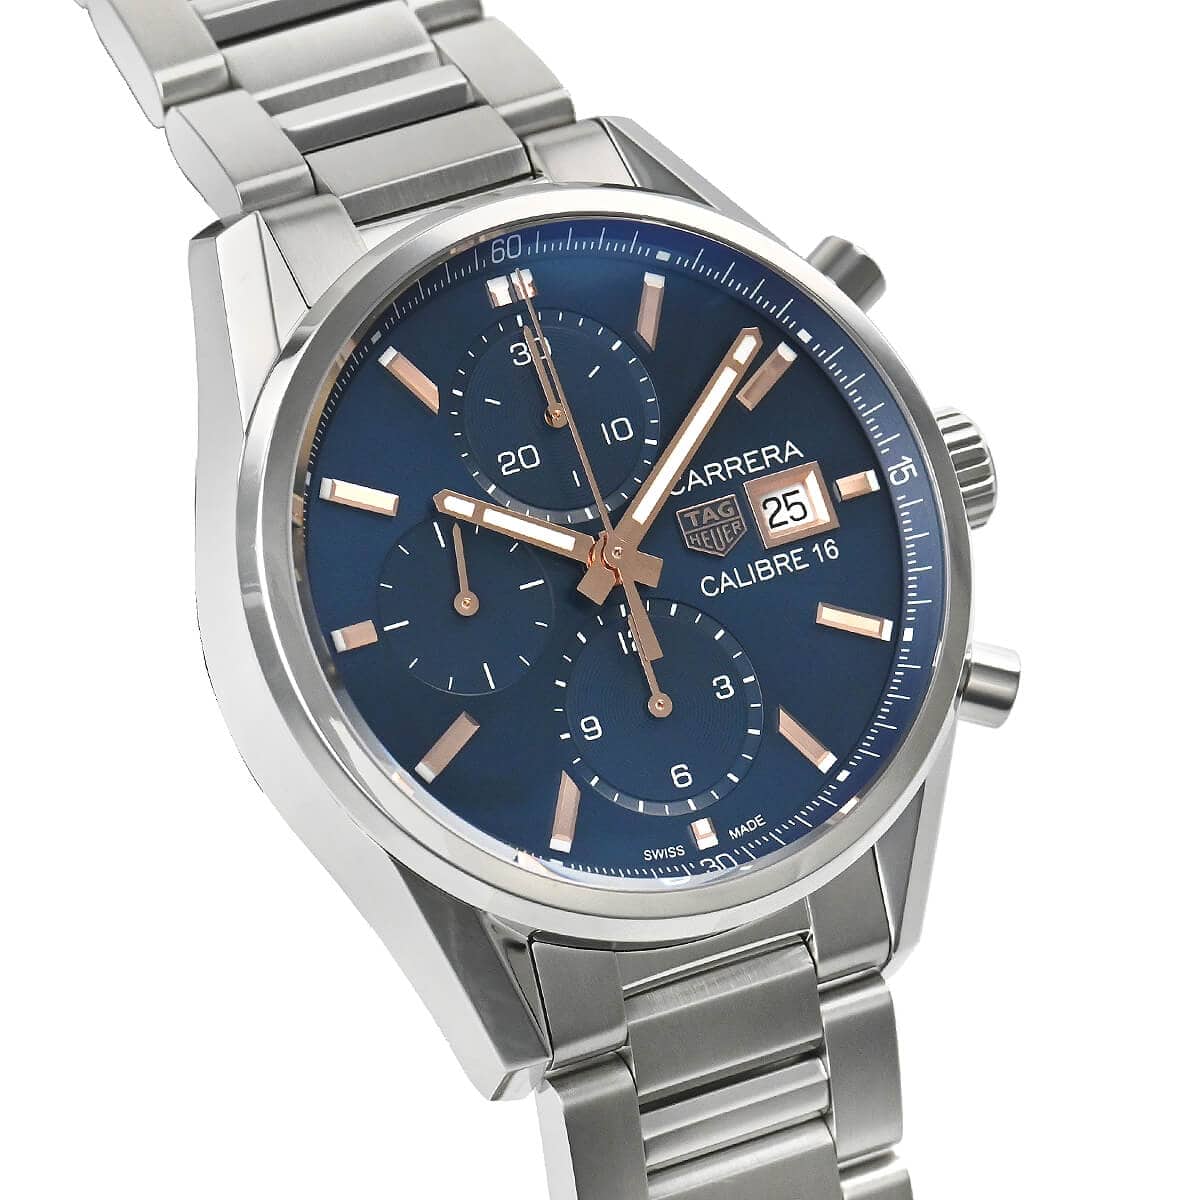 Tag Heuer Carrera Automatic Chronograph Blue Dial Silver Steel Strap Watch for Men - CBK2115.BA0715